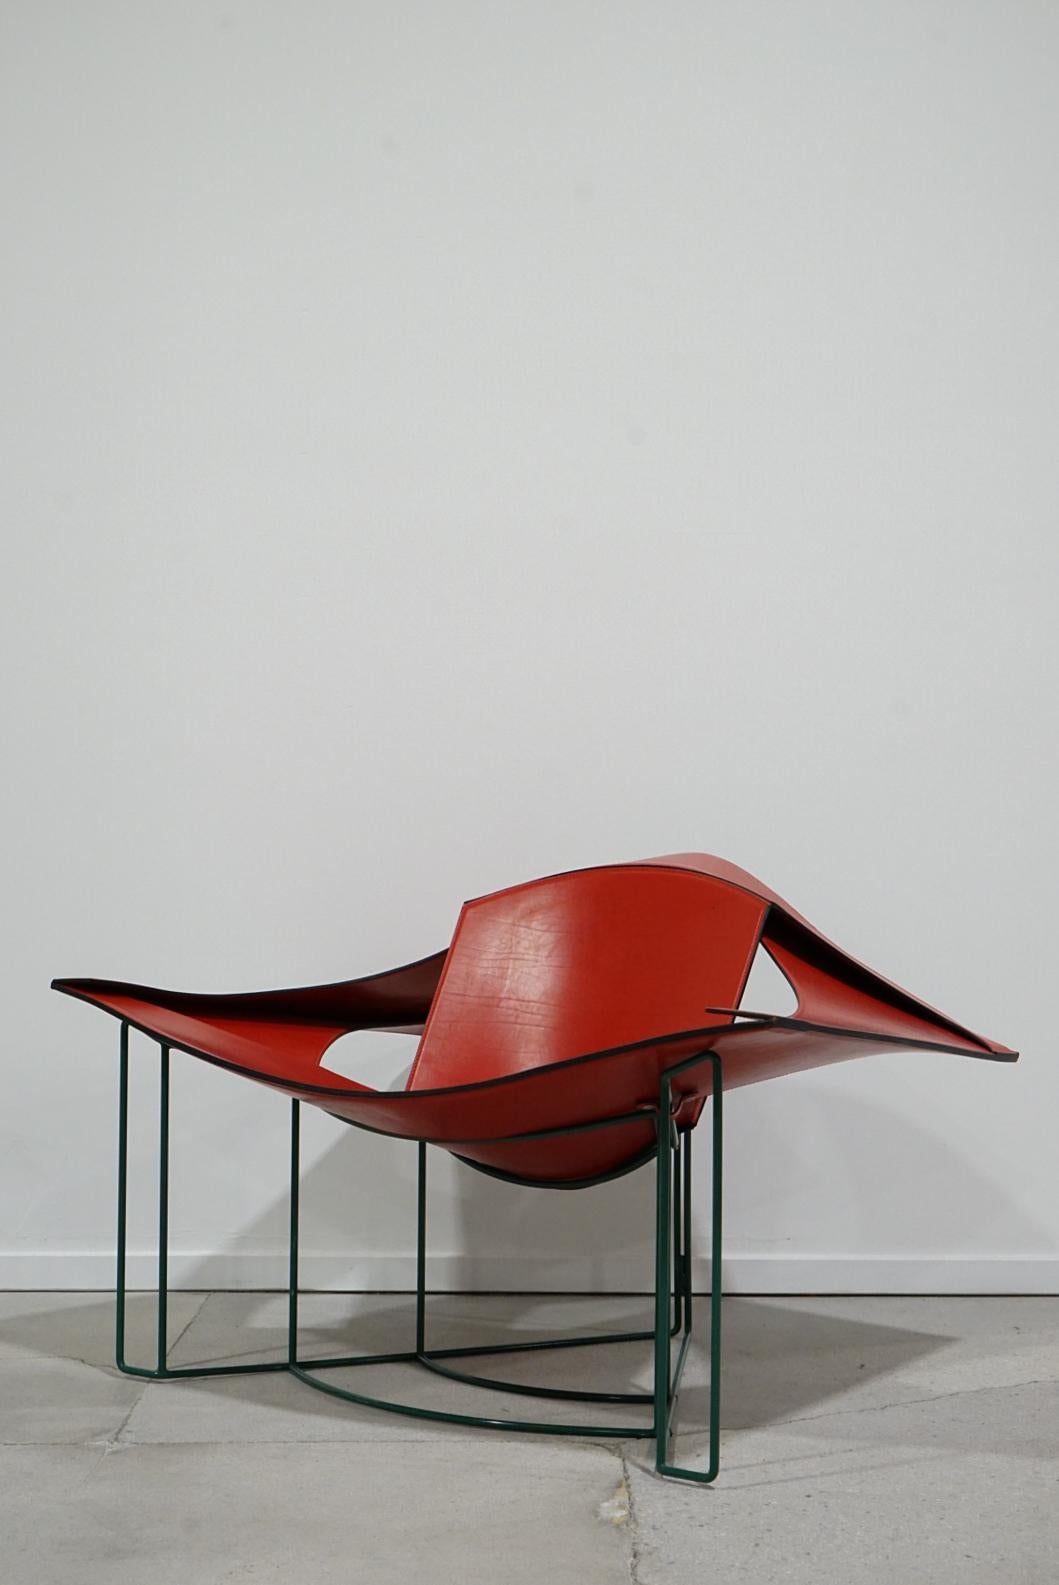 Hand-Crafted Rare Jacques Harold Pollard Lounge Chair, Matteo Grassi Italy, 1987